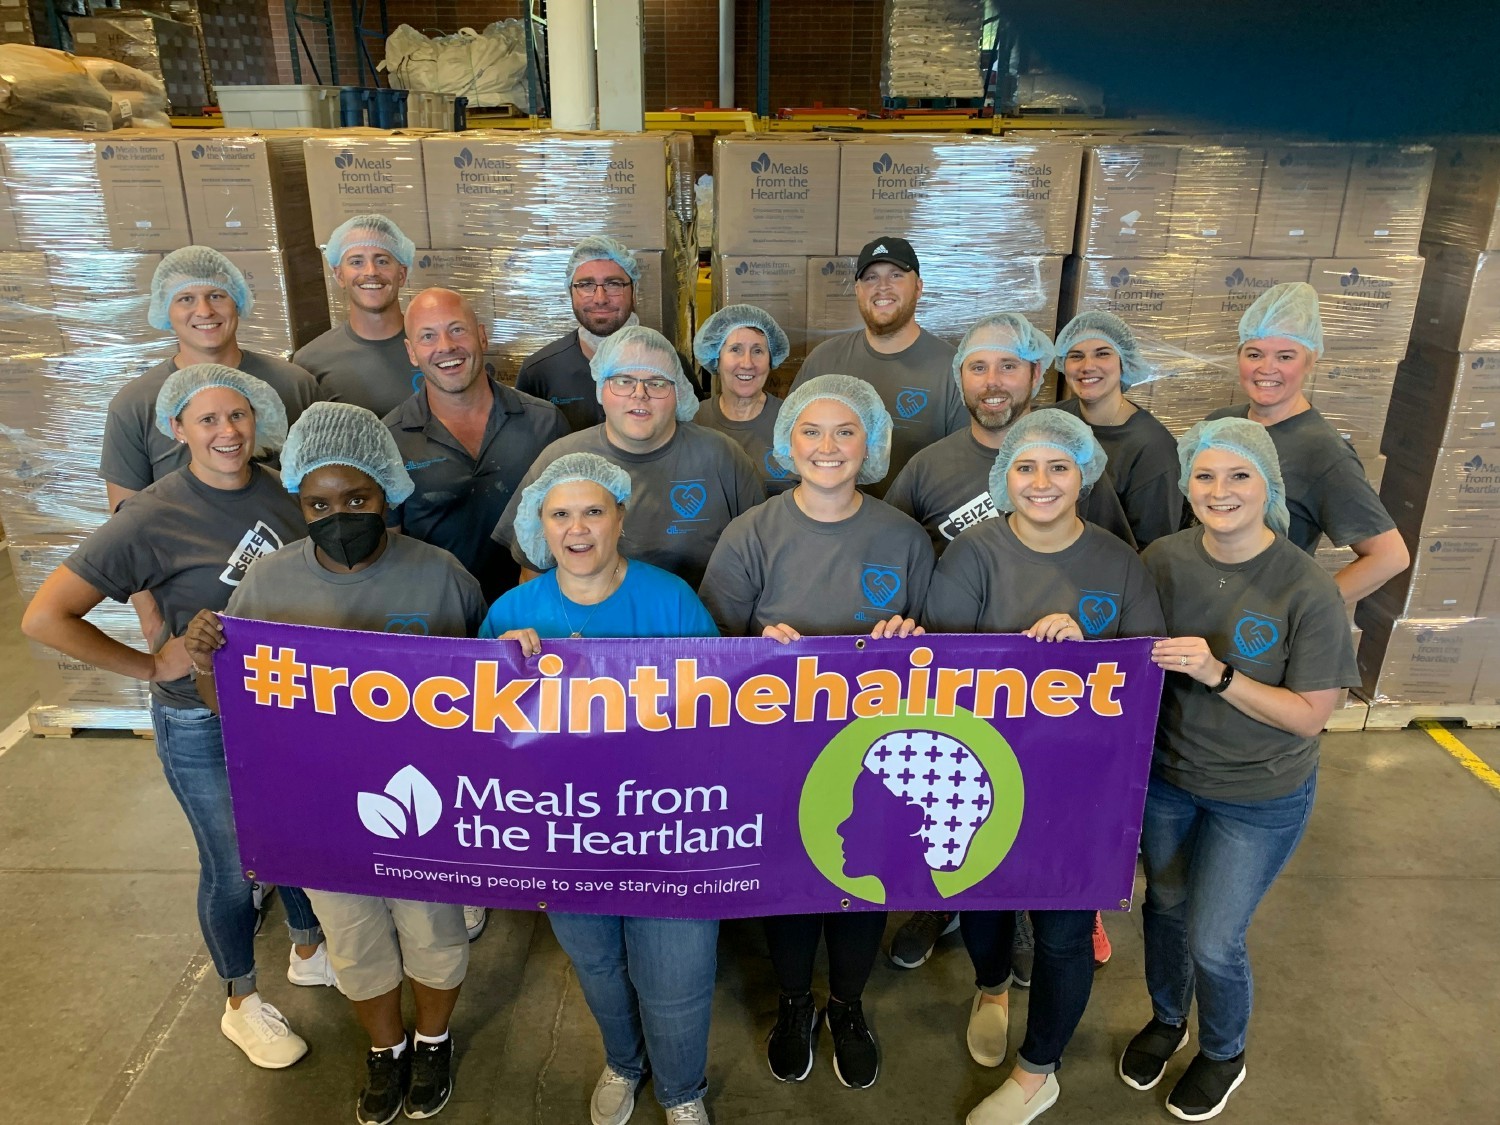 Members packaged meals to help feed children around the world. Giving back is a vital part of DLL’s culture. 